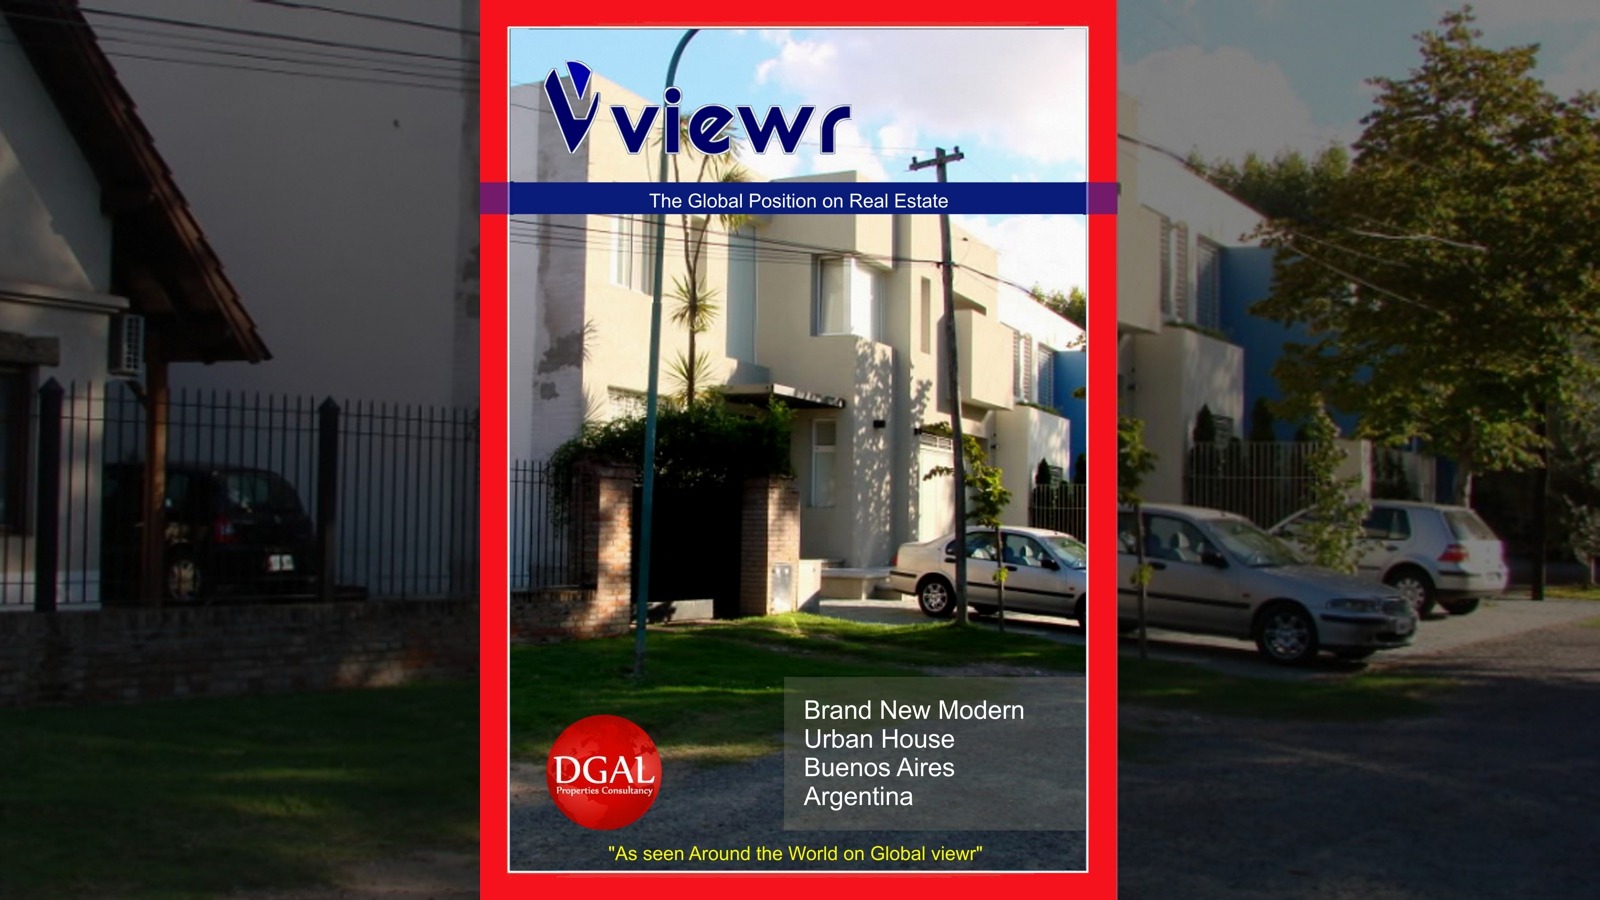 Global viewr Magazine Buenos Aires Argentina House DGAL